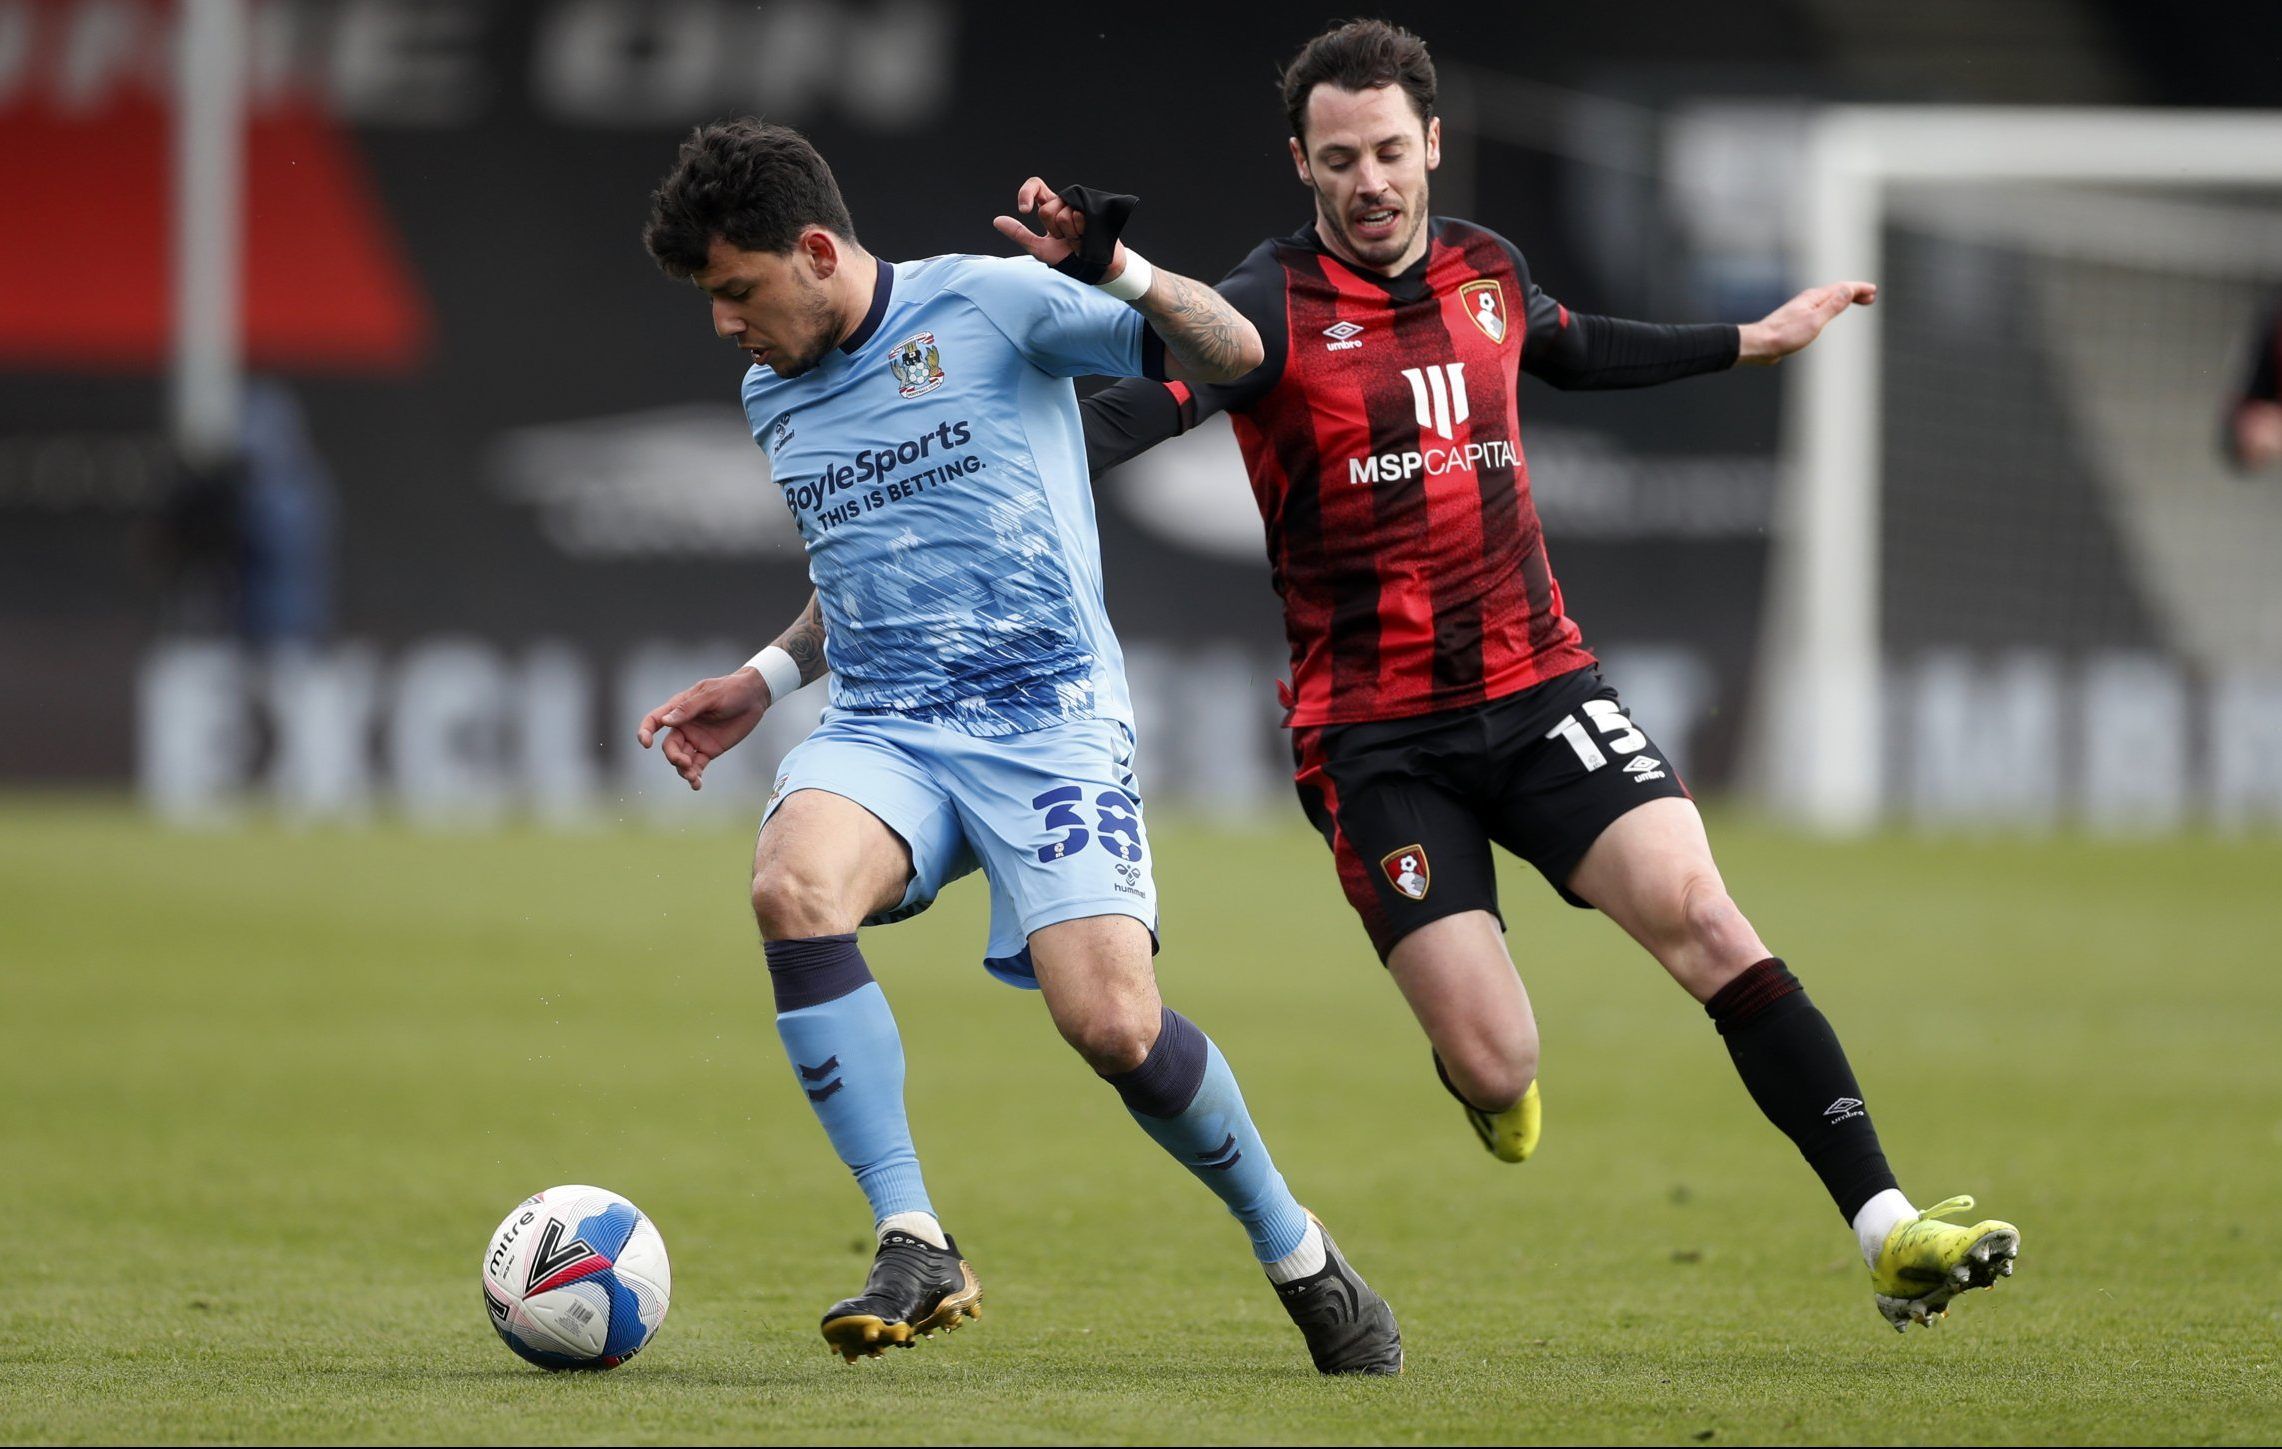 coventry city midfielder gustavo hamer on the ball vs afc bournemouth in the championship